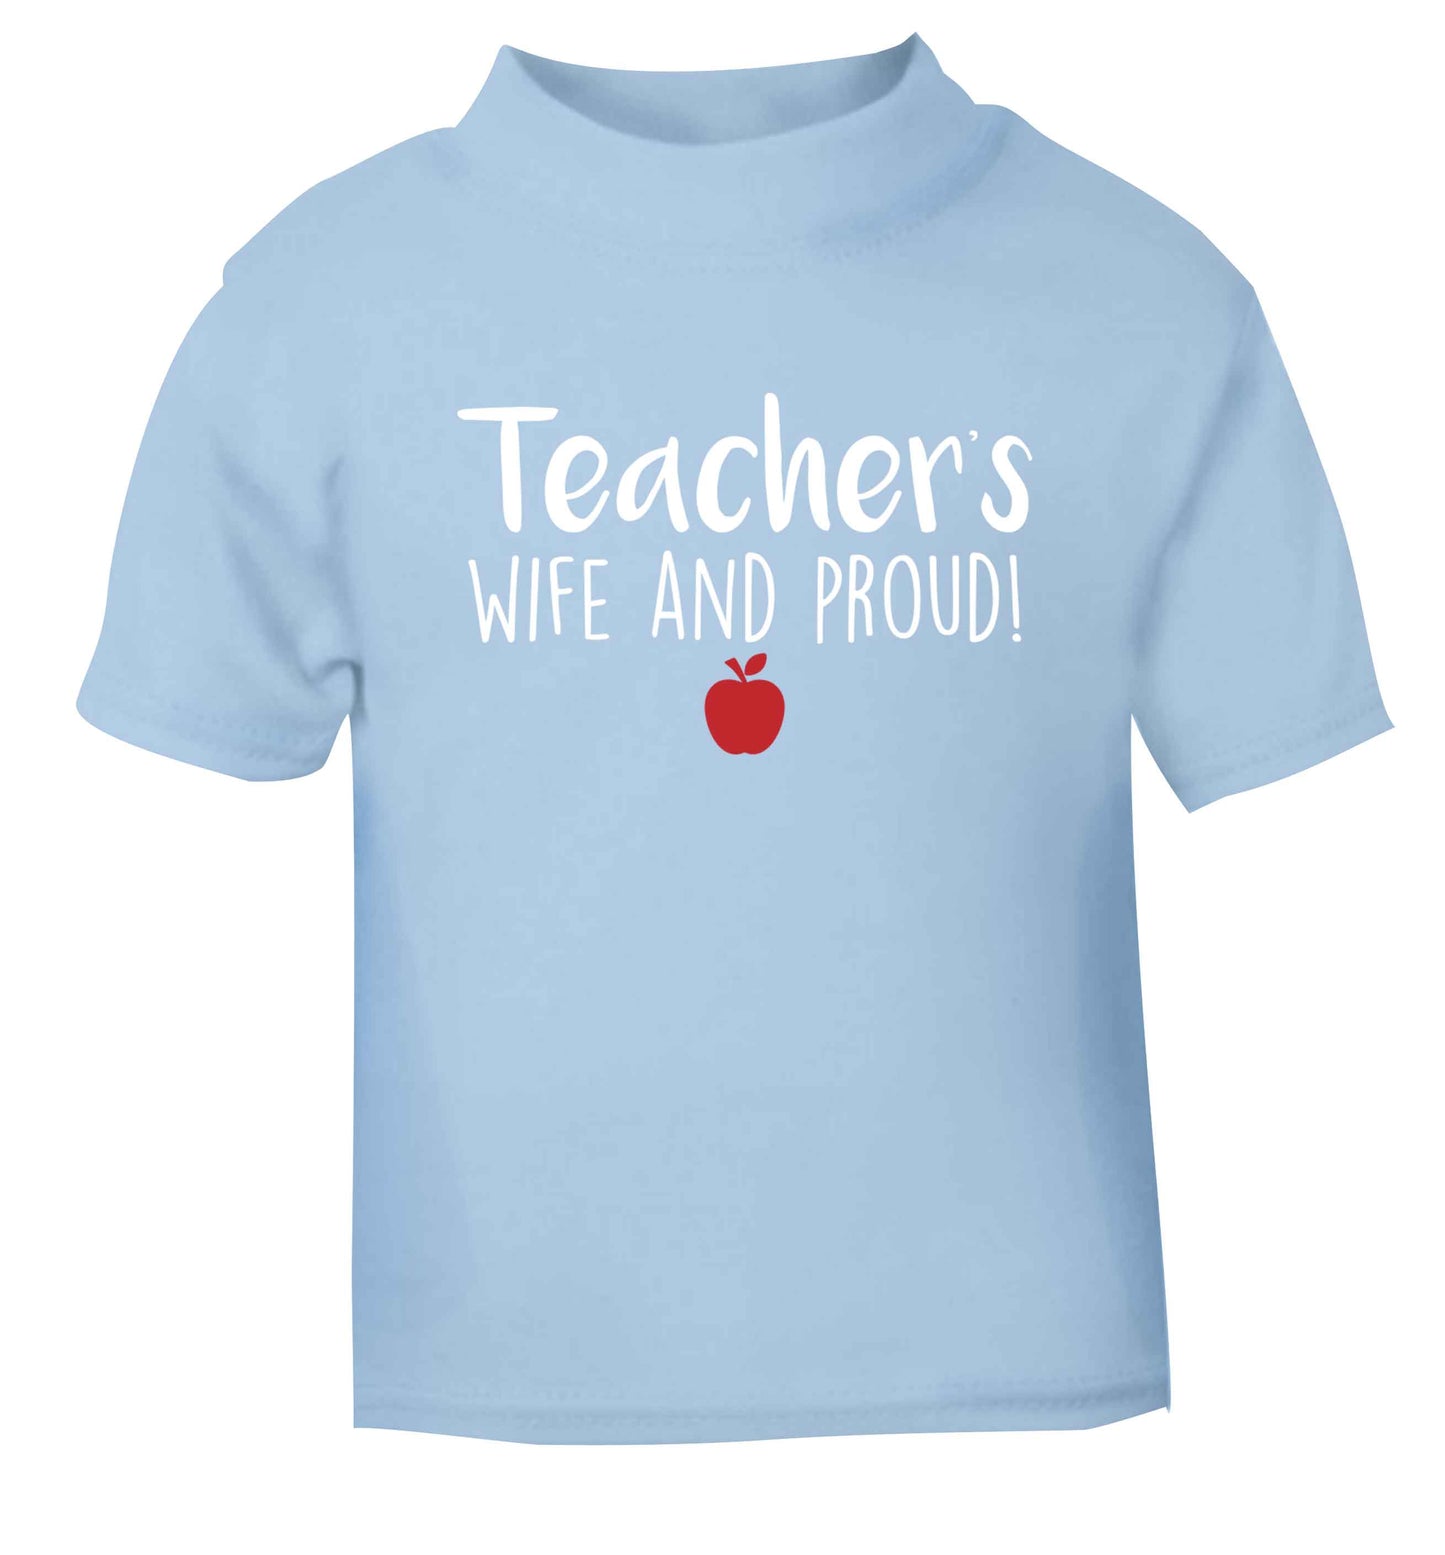 Teachers wife and proud light blue baby toddler Tshirt 2 Years